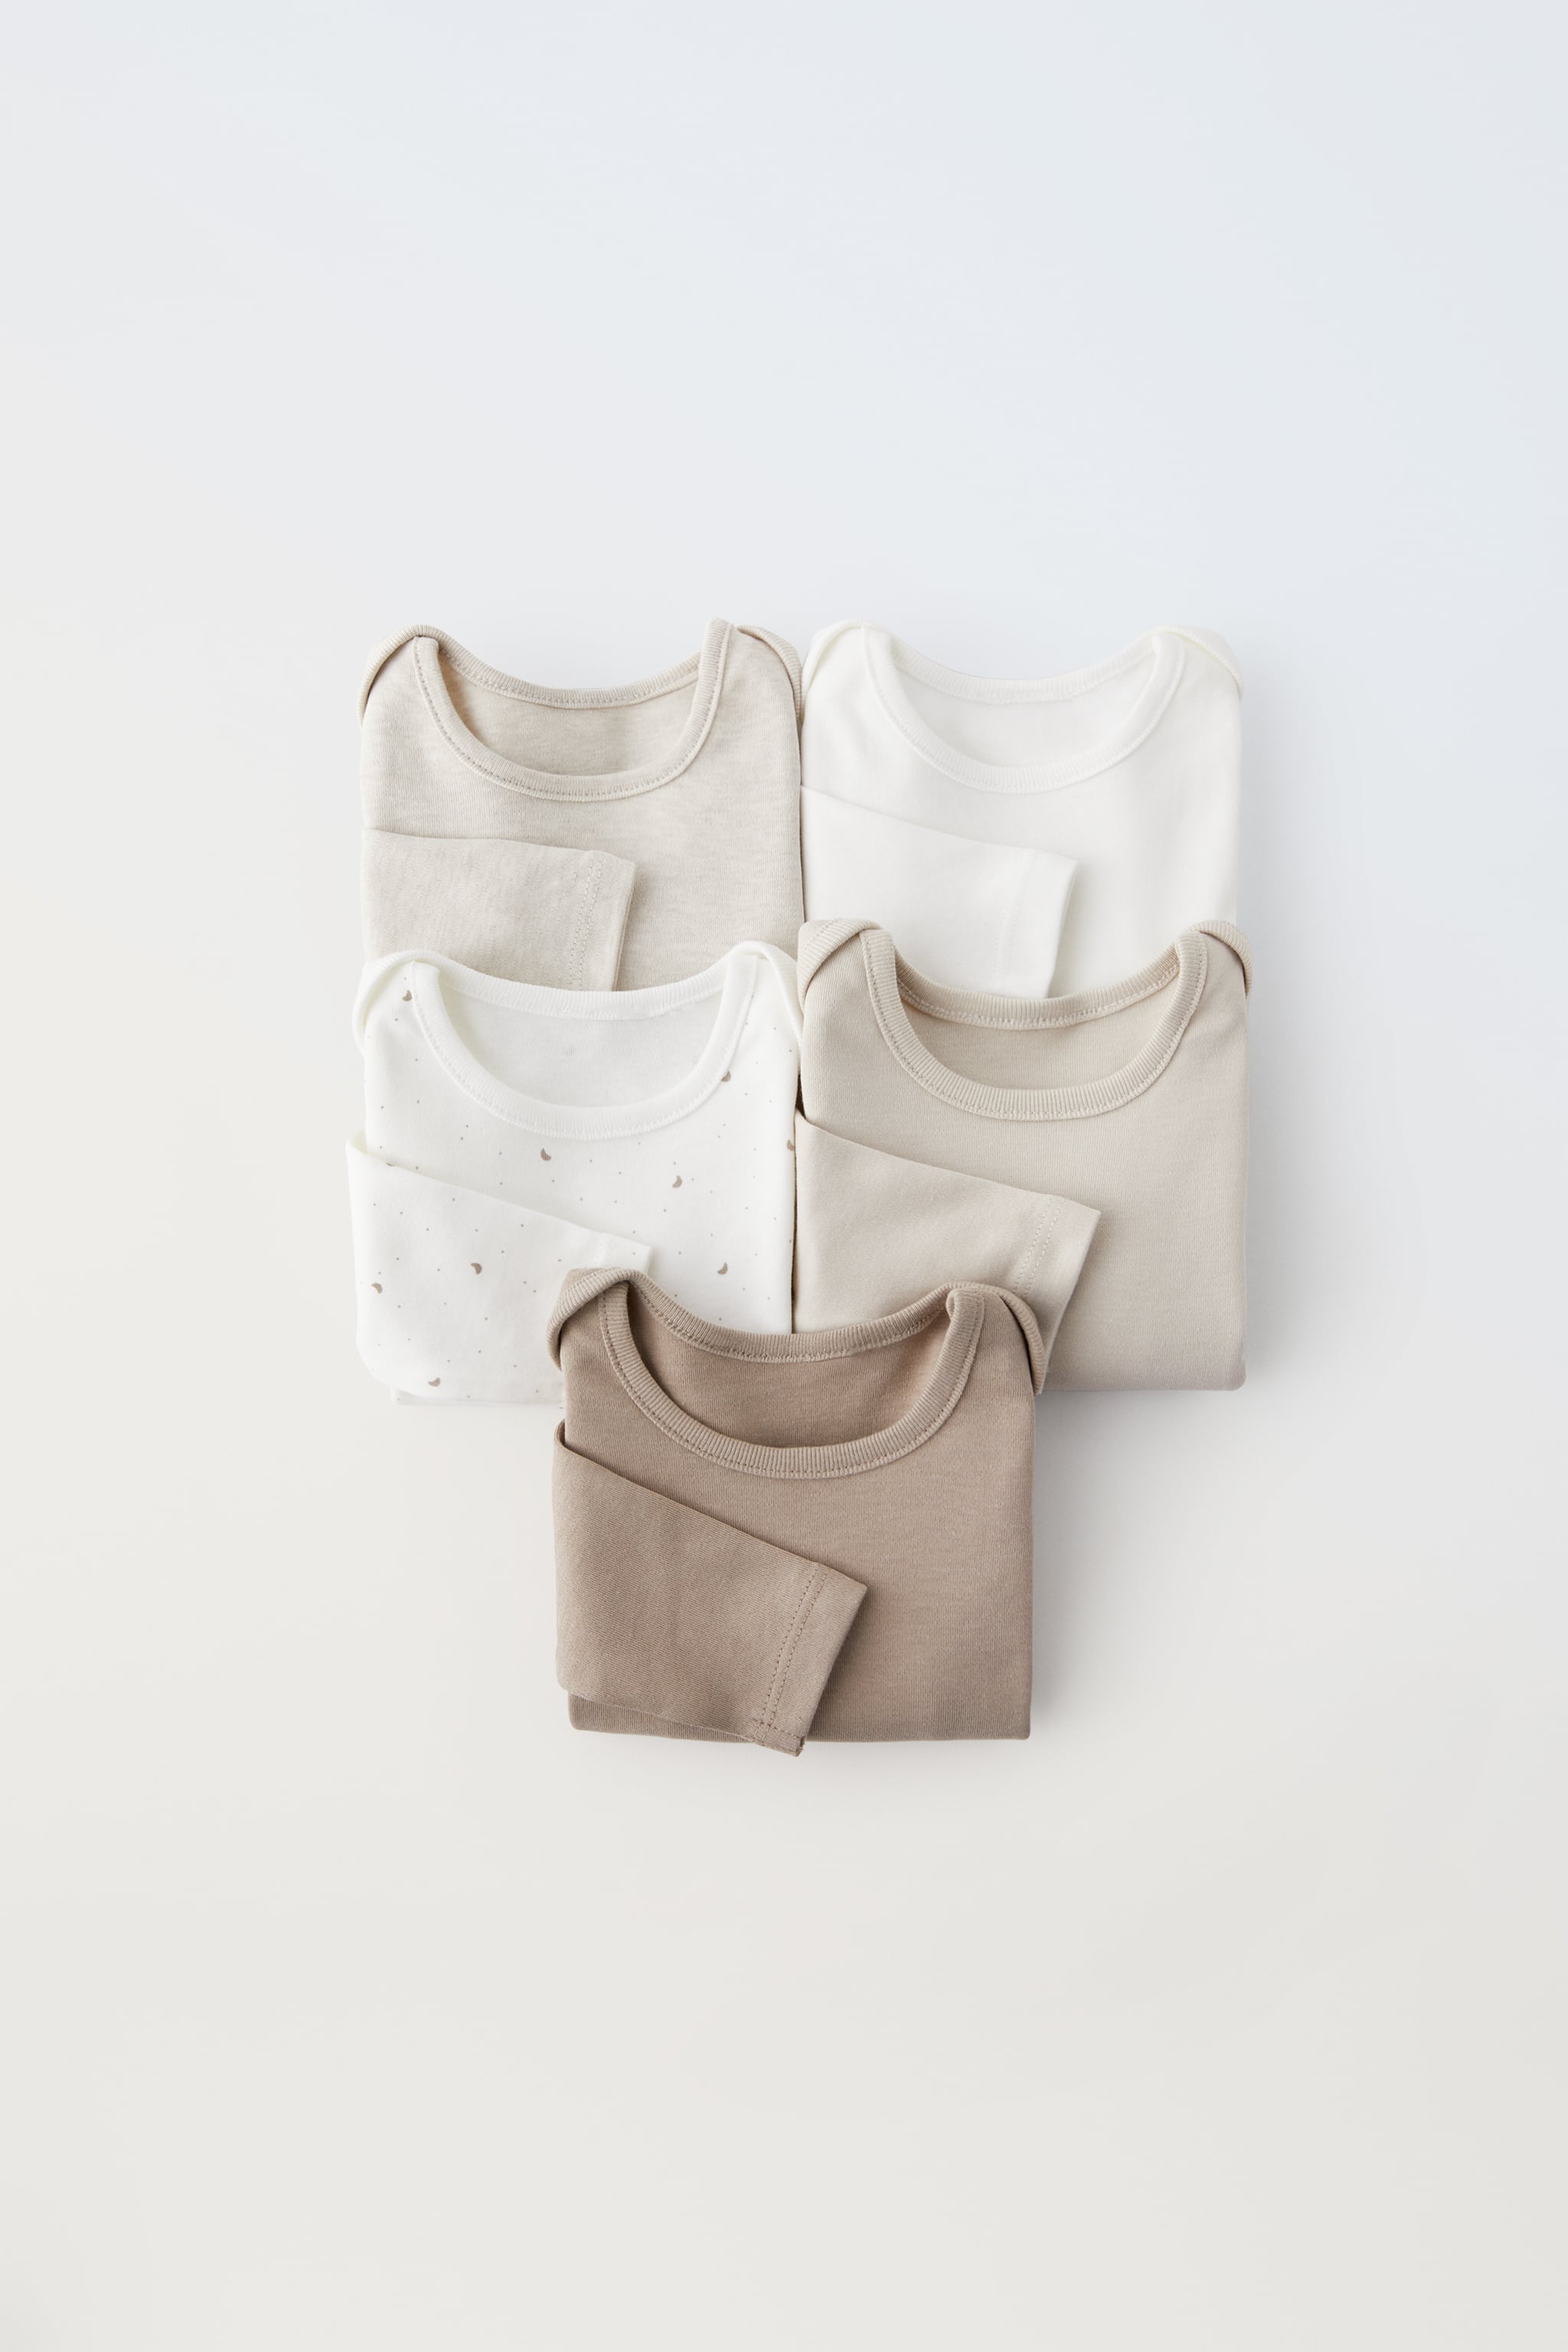 FIVE-PACK OF TOAST COLORED BODYSUITS